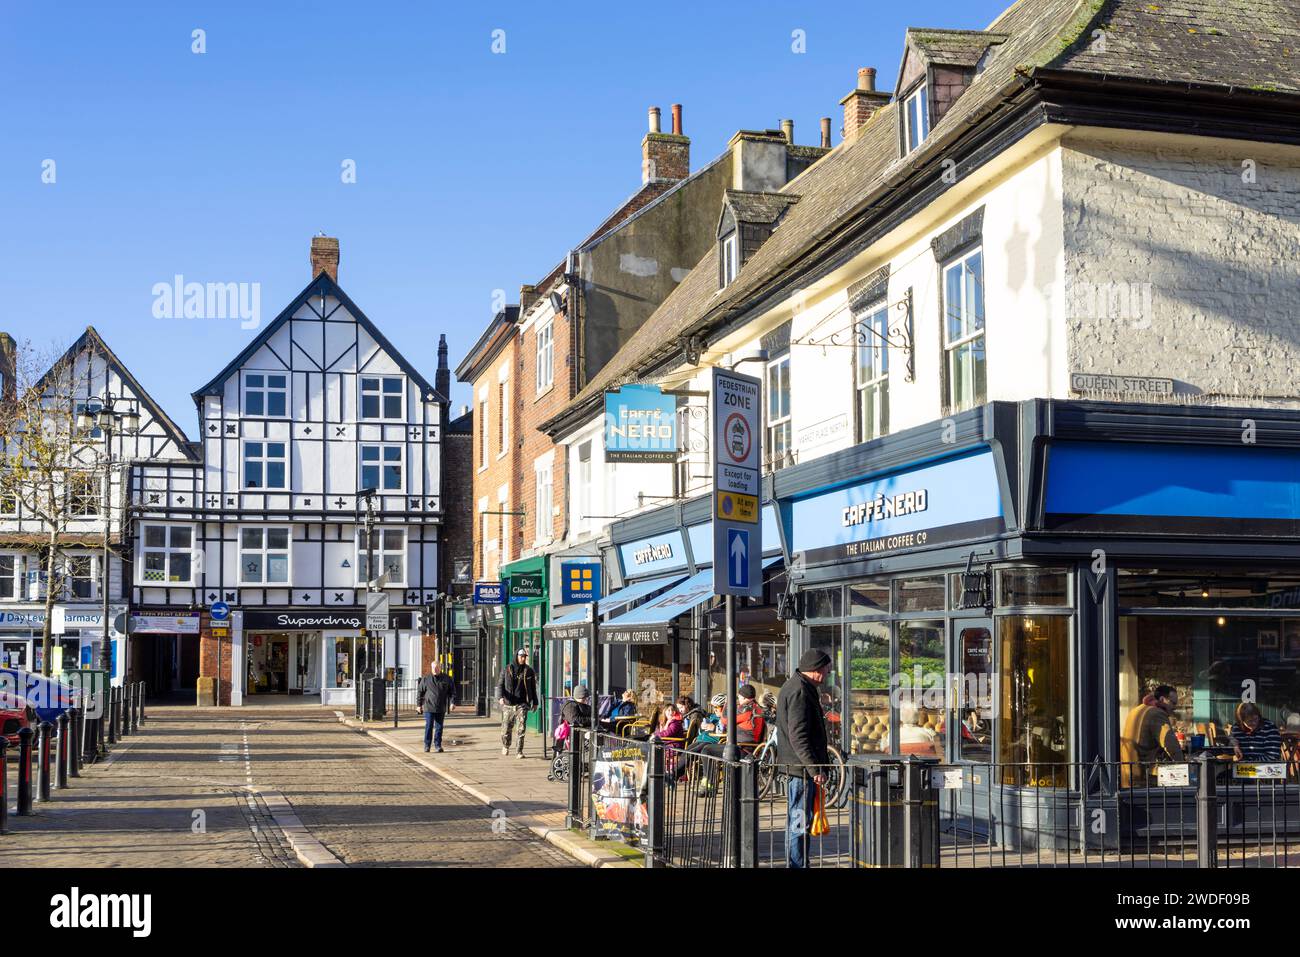 Ripon Market Place North Caffe Nero coffee shop Greggs bakery and other local shops in Ripon North Yorkshire England UK GB Europe Stock Photo